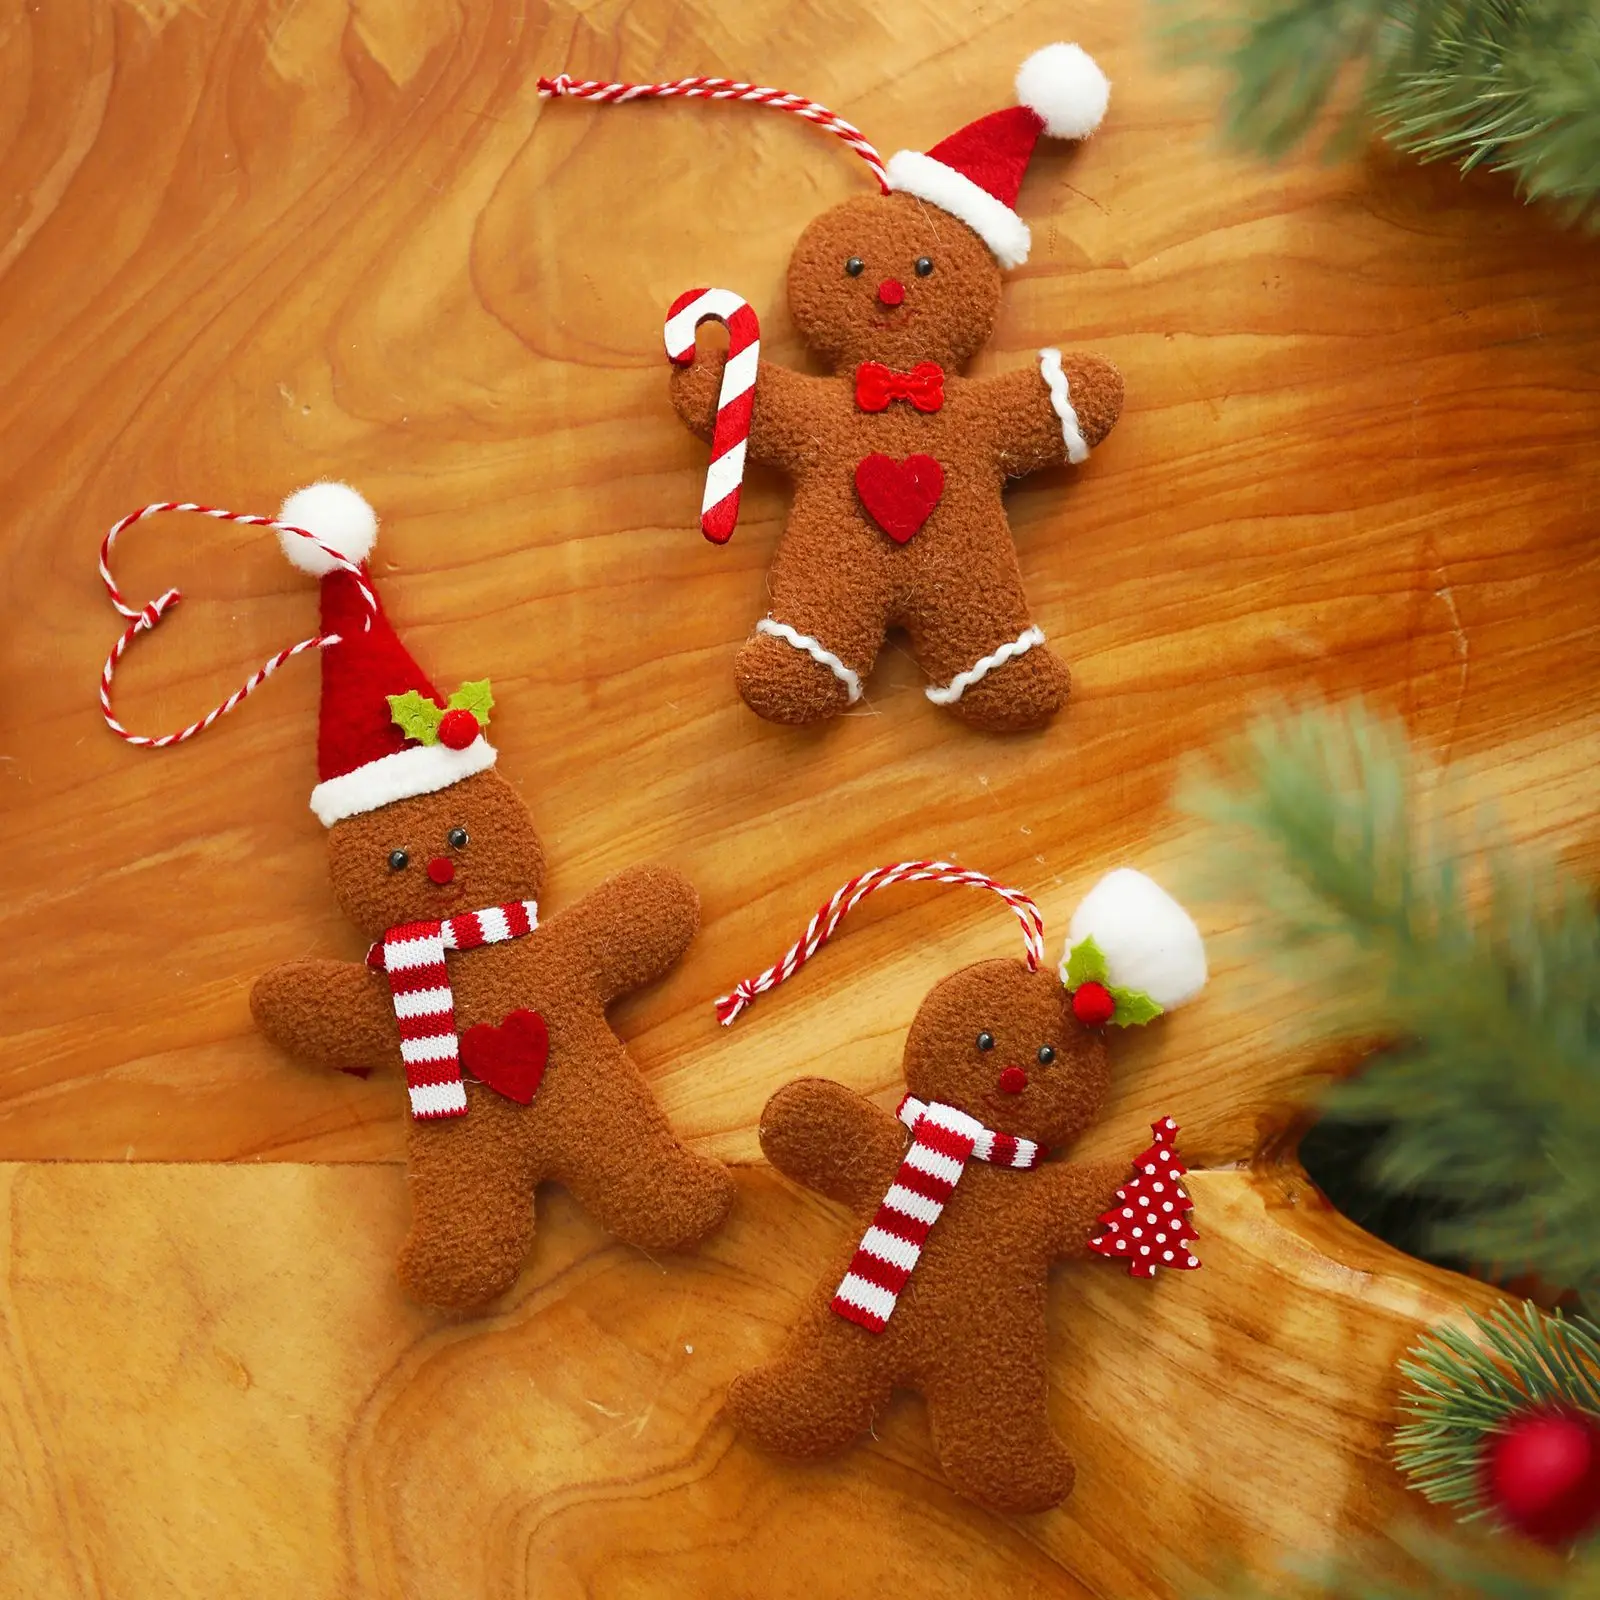 

3Pcs Christmas Fuzzy Gingerbread Man Doll Xmas Tree Pendants Hanging Ornaments Christmas Decorations for Home Kids New Year Gift